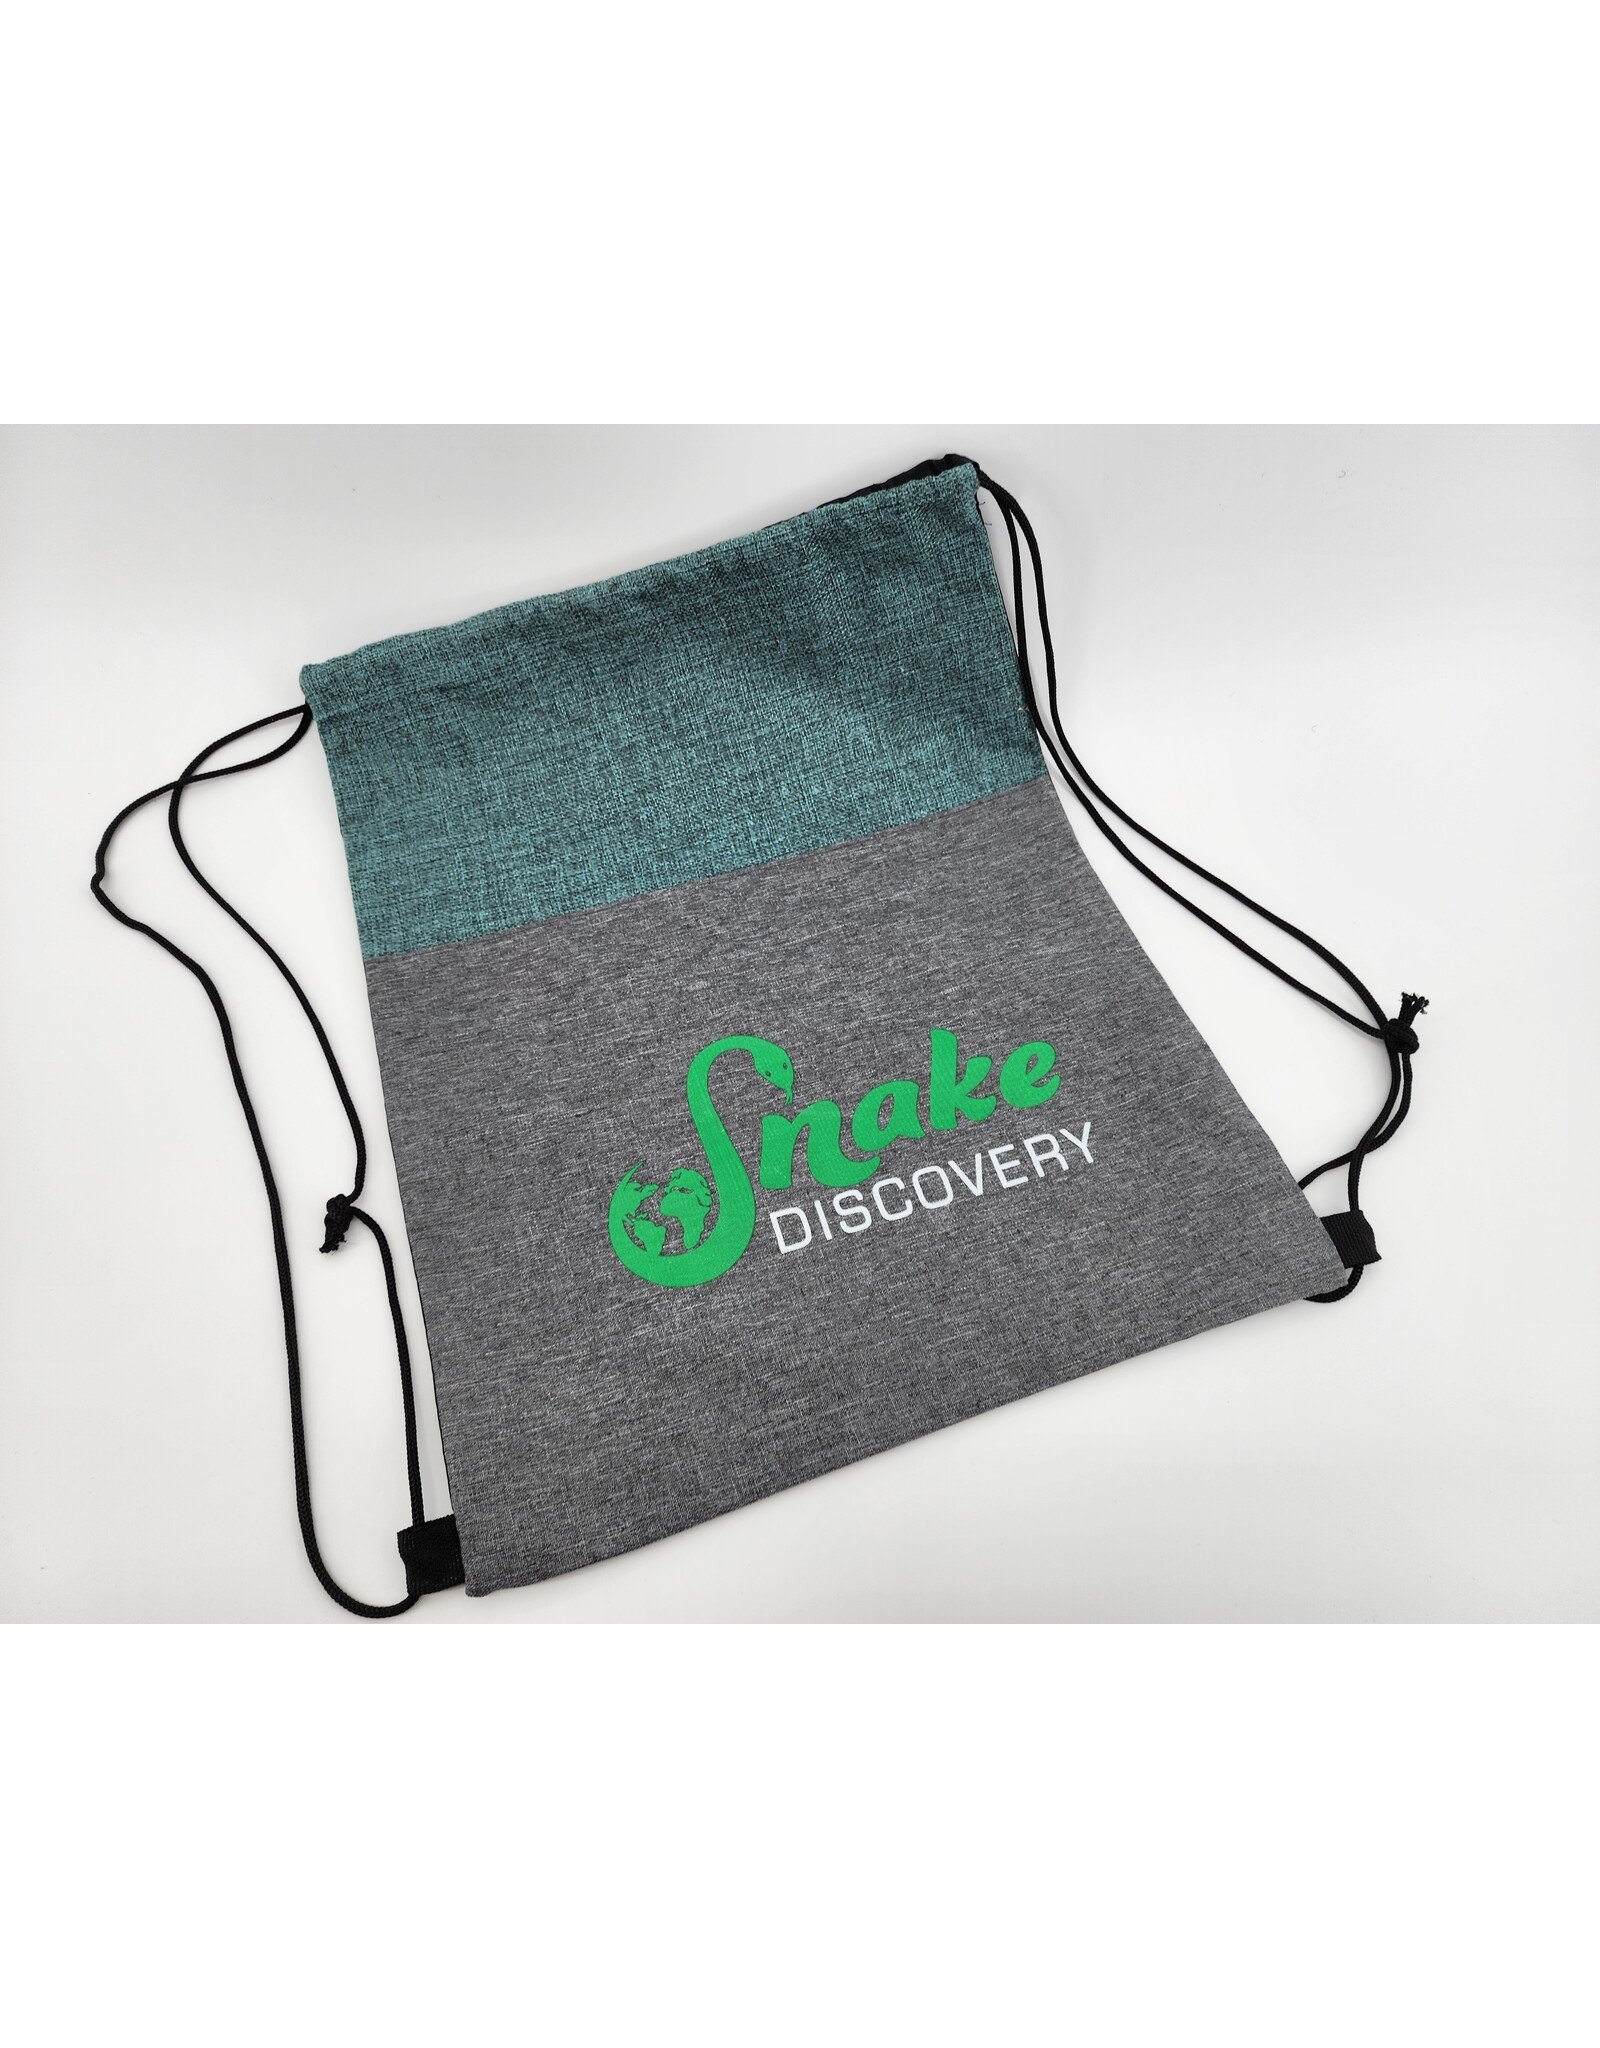 Snake Discovery SD Drawstring Backpack